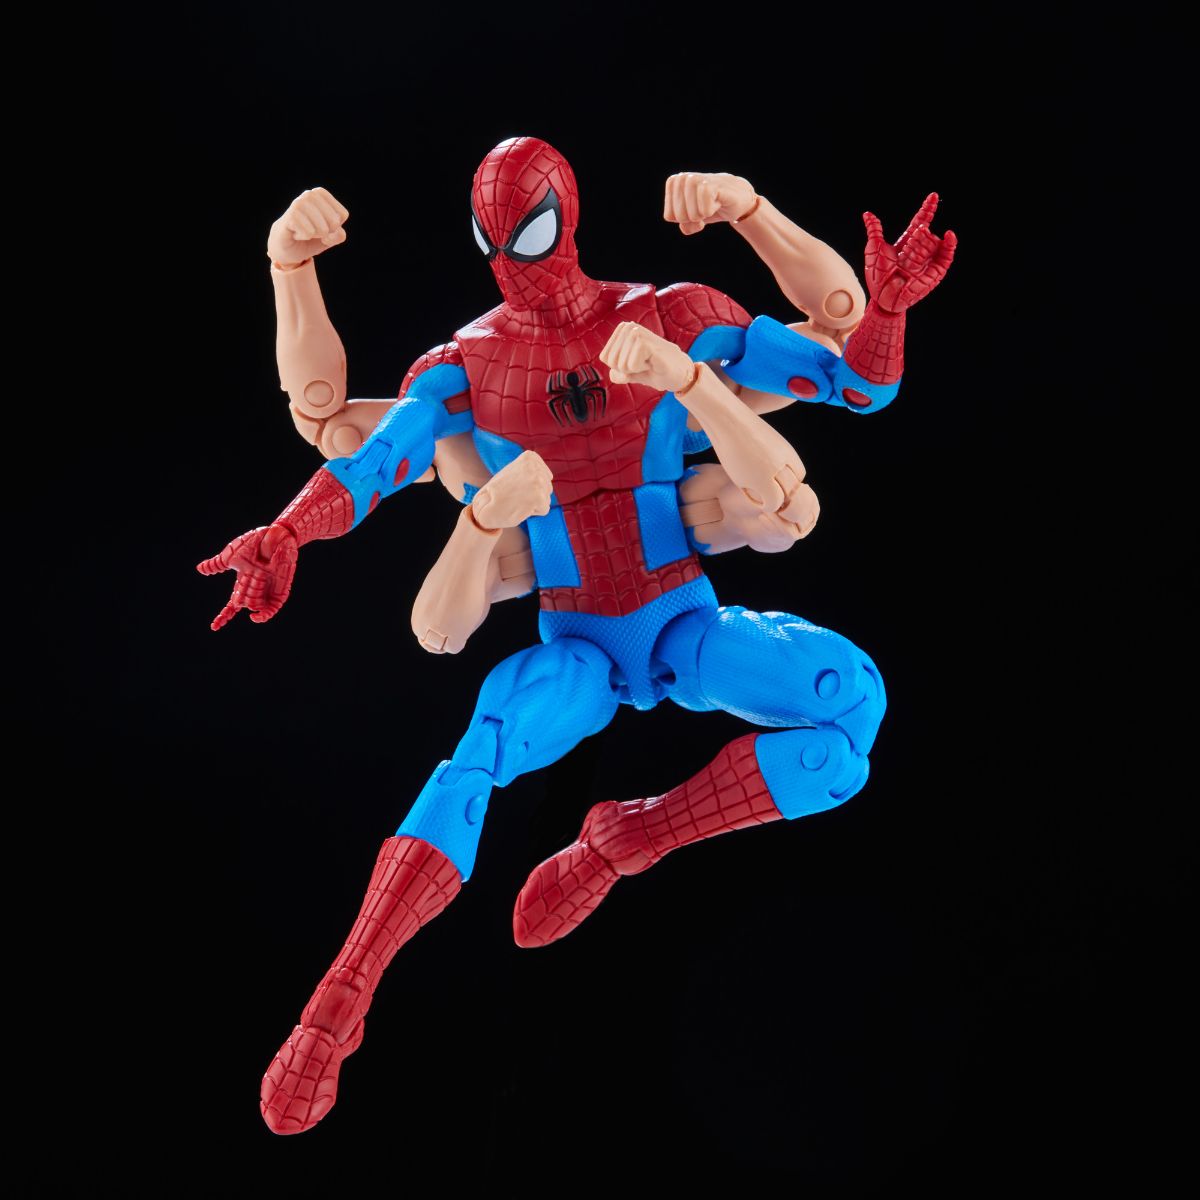 Marvel Legends the Amazing Spider-Man Spider-Man and Morbius 6-Inch Action Figure 2-Pack画像